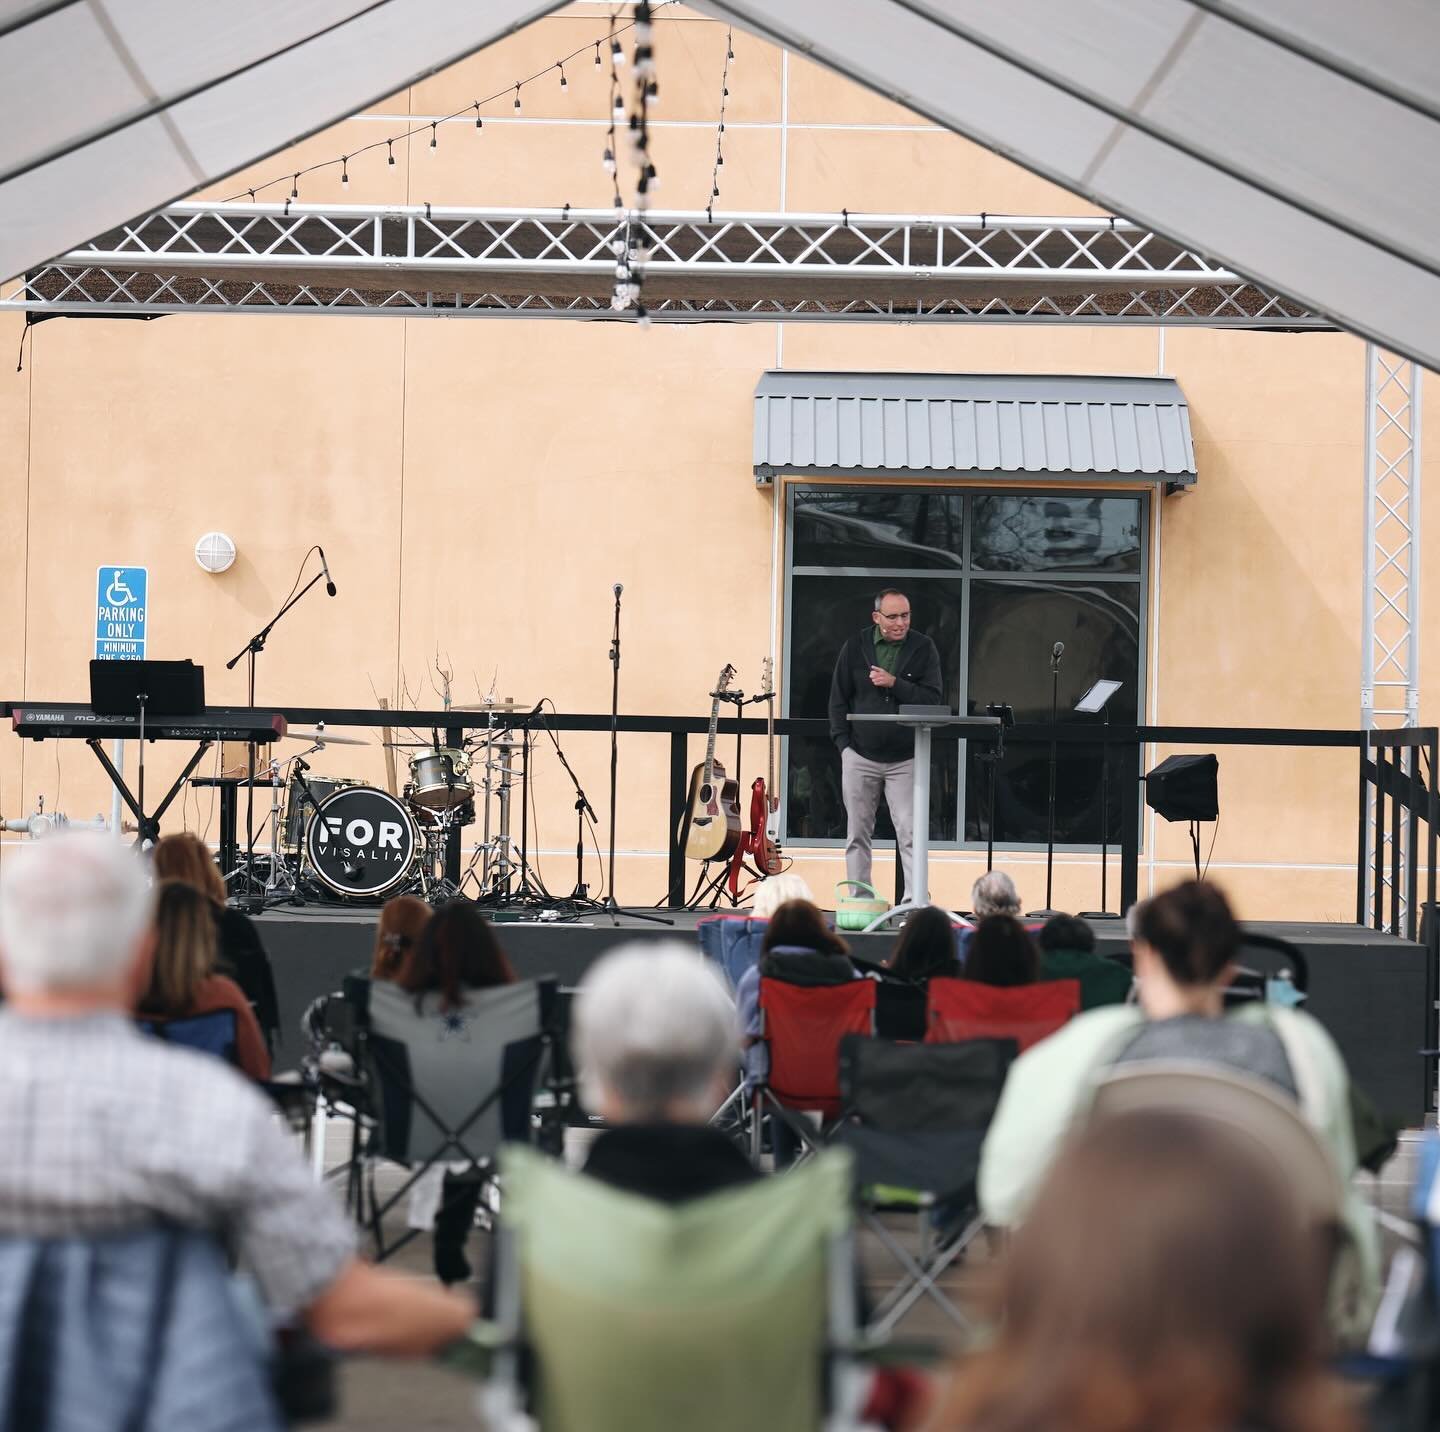 For several years, we&rsquo;ve dreamed of doing church outside again. There&rsquo;s nothing like spending time in the sunshine with your people. ☀️

Tomorrow is Church on the Lawn! We&rsquo;ll gather for one service at 10:00AM on the grass behind the